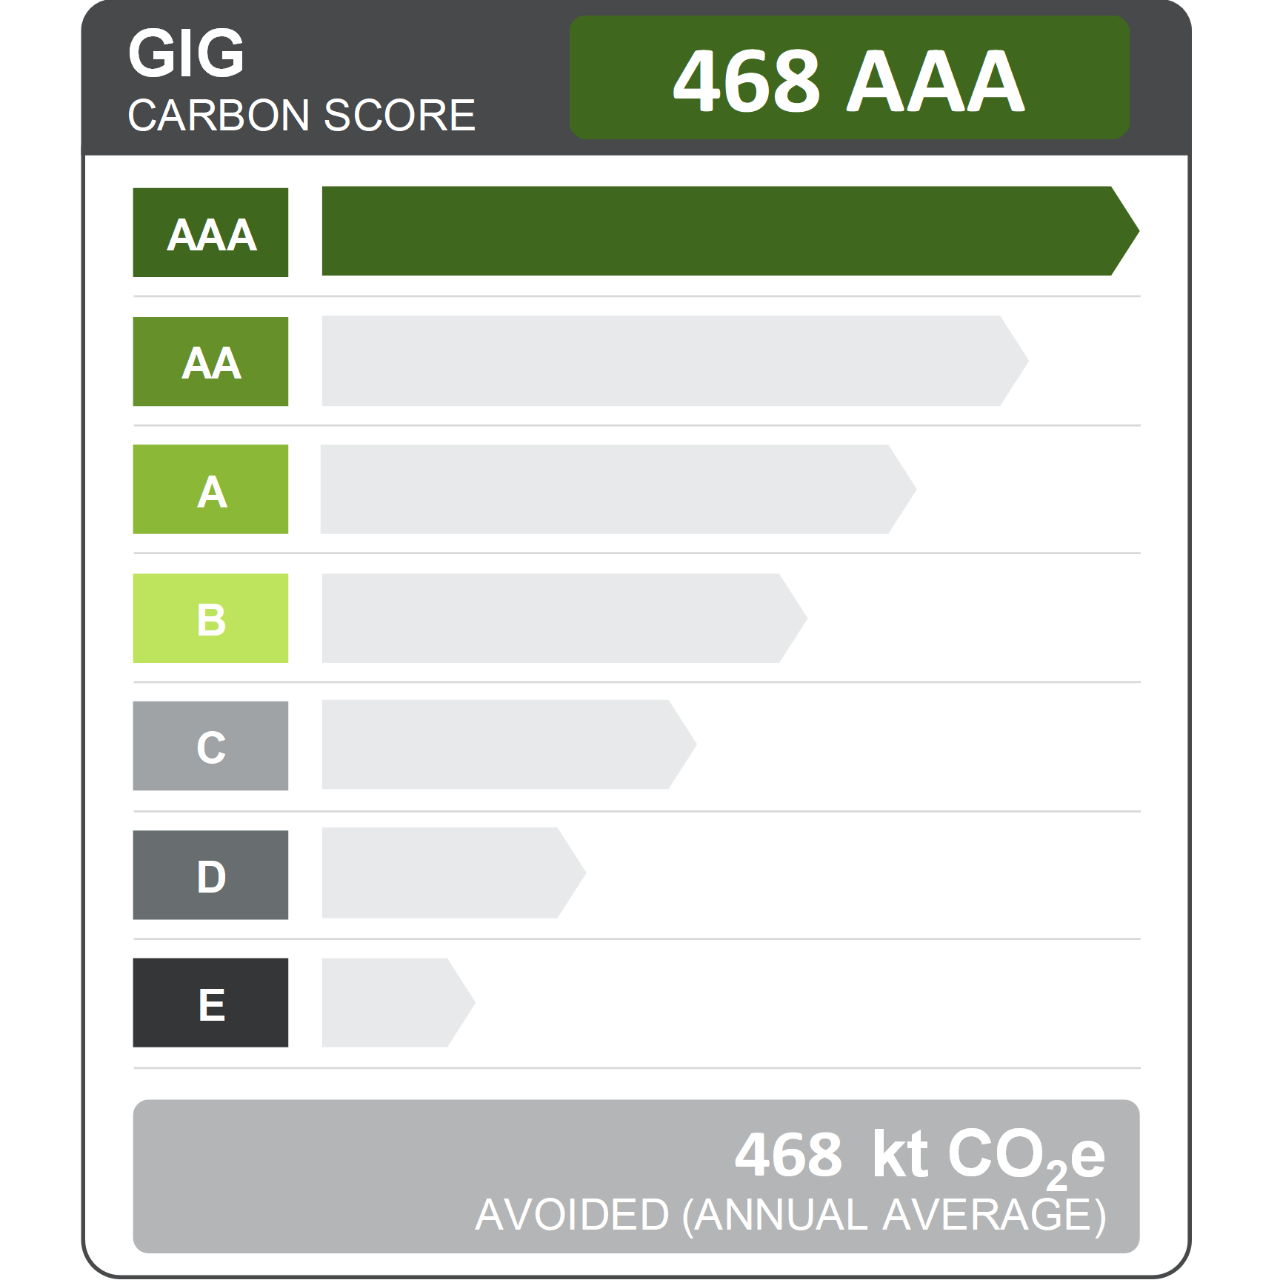 GIG Carbon Score of 468 AAA rating for Murra Warra